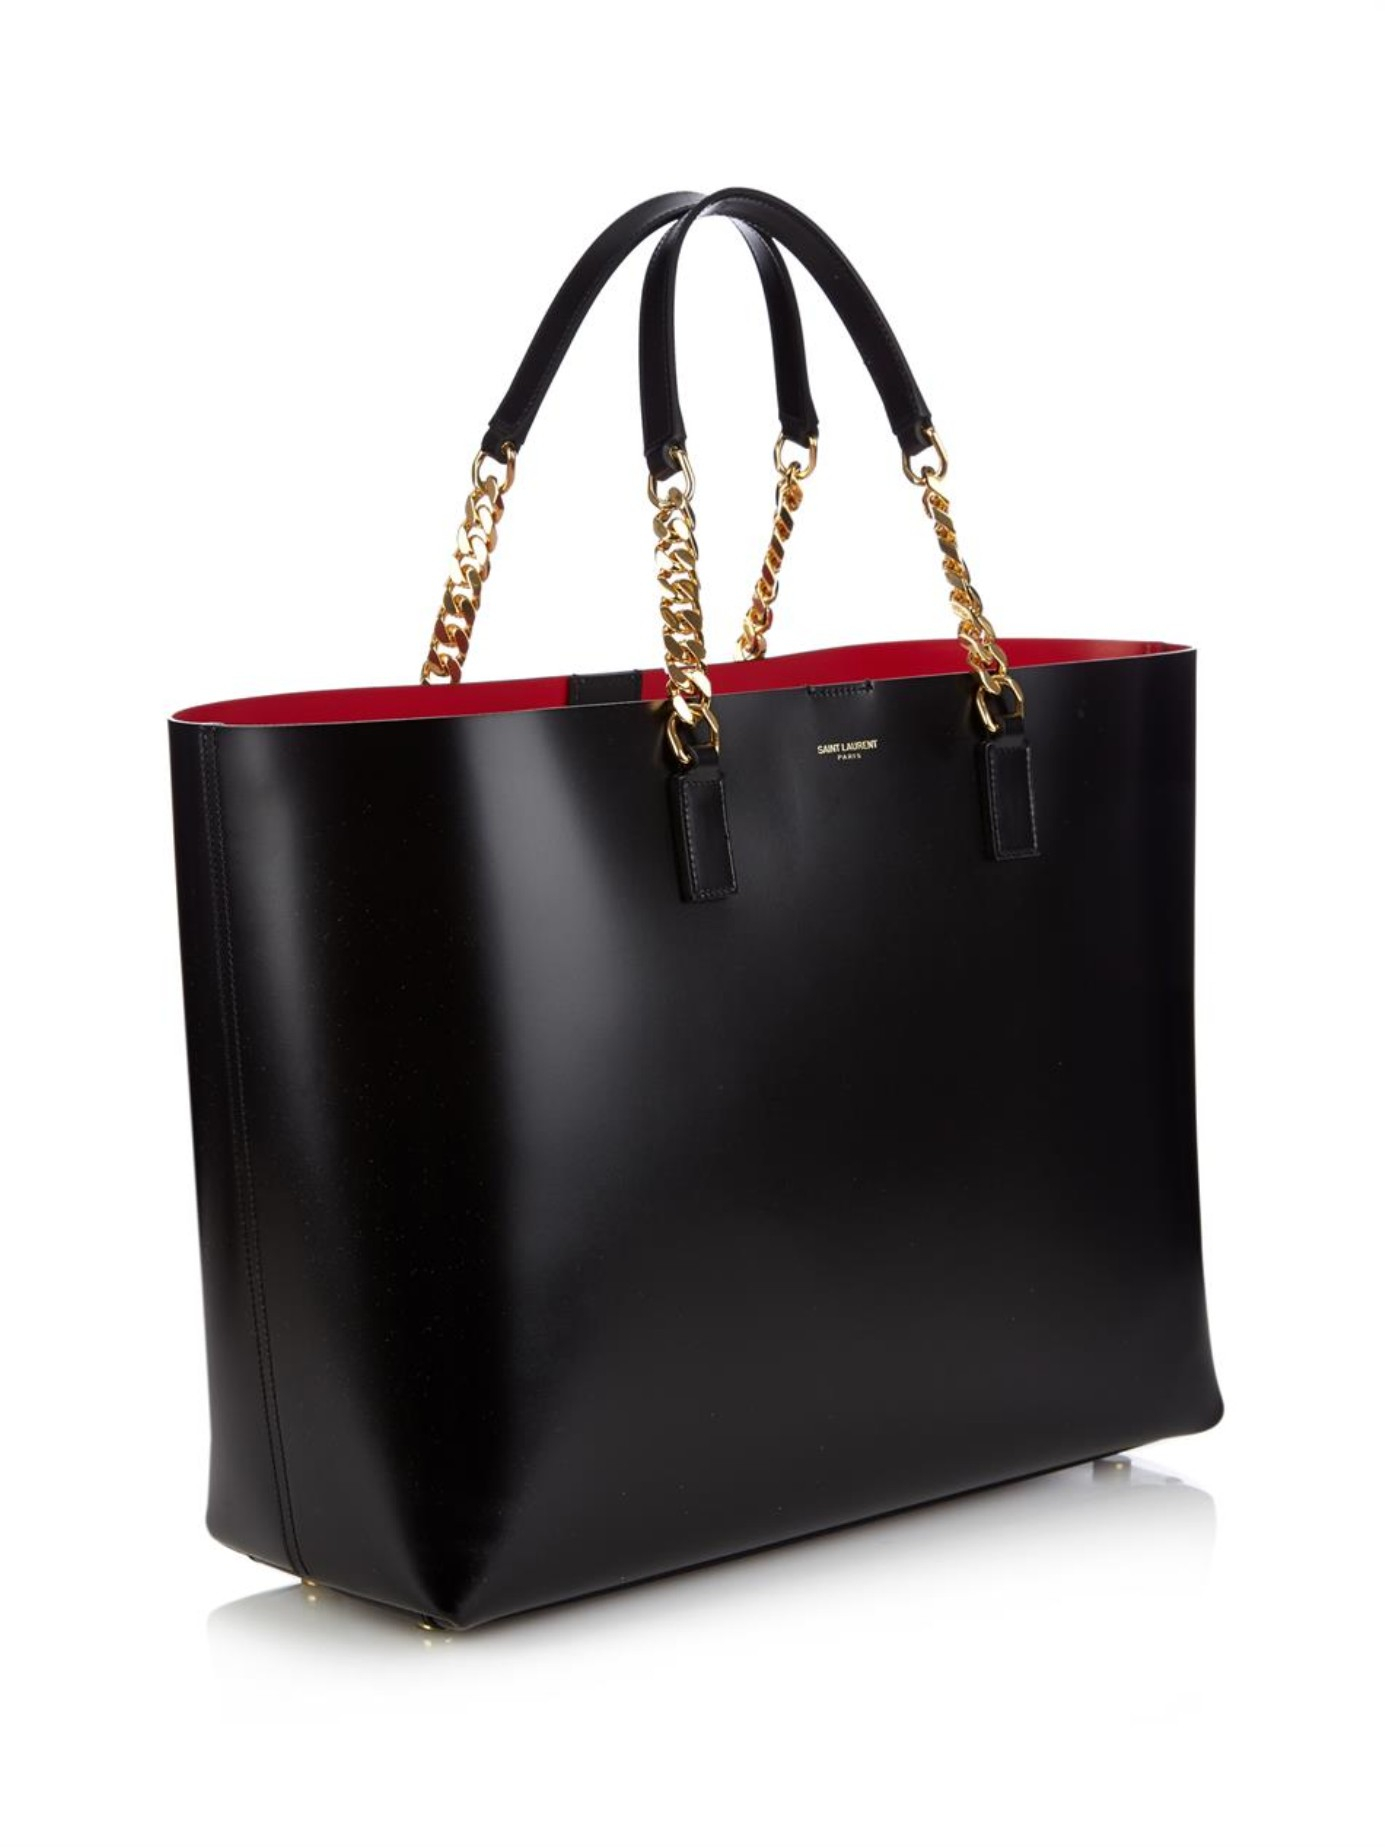 Lyst - Saint laurent Monogram Double-faced Leather Tote in Black